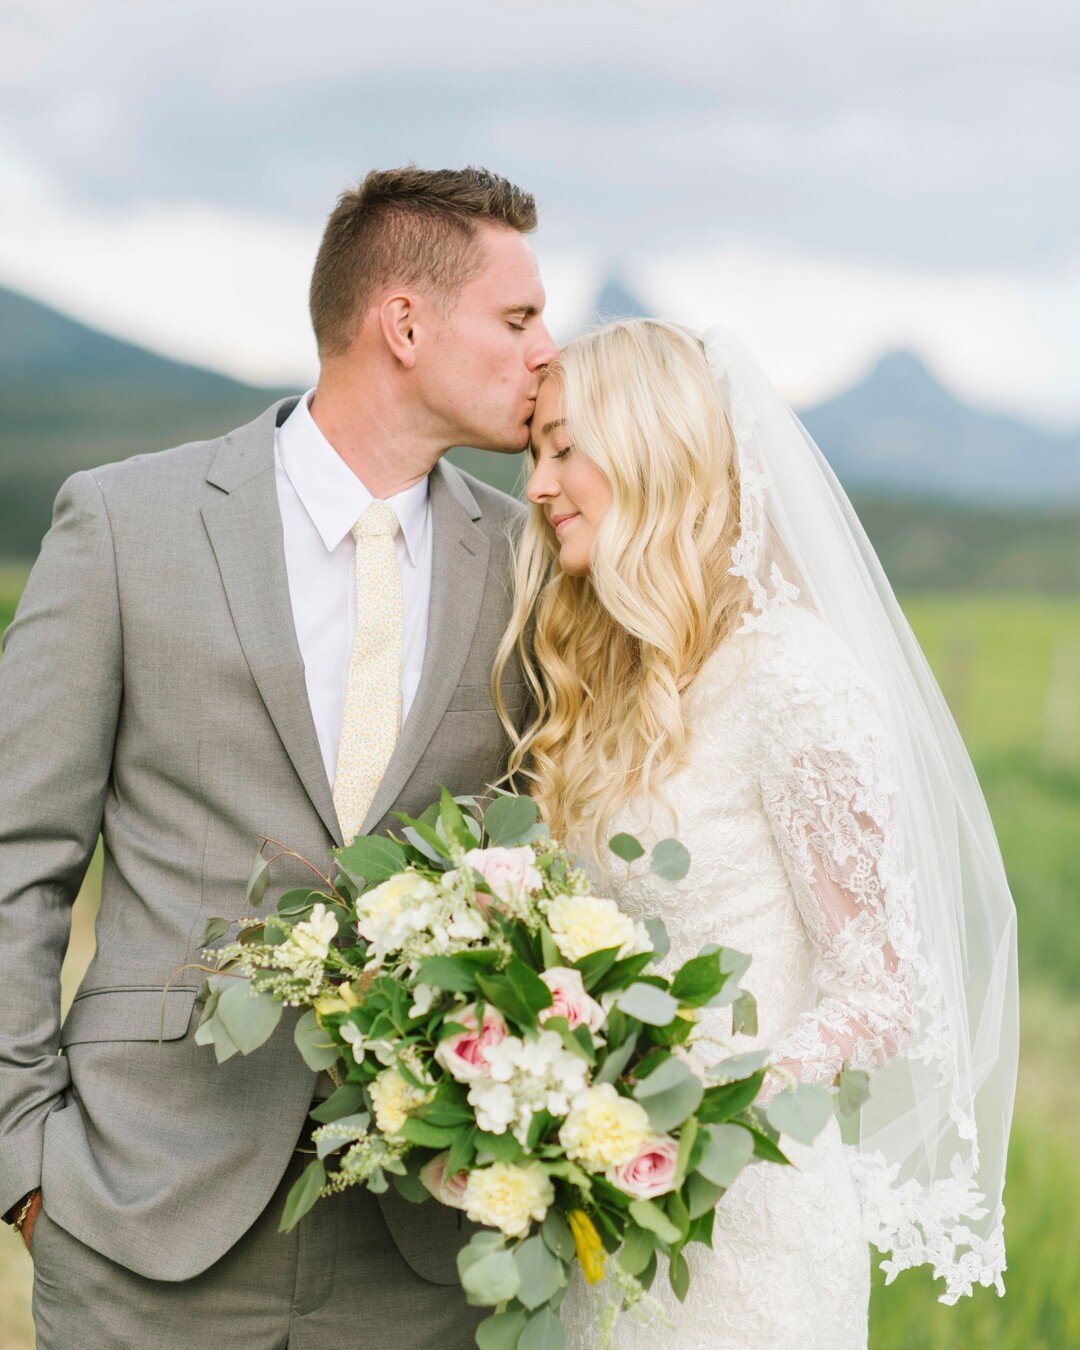 Those dreamy Tetons. They are so pretty, and so is this sweet couple! ⠀⠀⠀⠀⠀⠀⠀⠀⠀
Bride @kallee_32⠀⠀⠀⠀⠀⠀⠀⠀⠀
Photo @alyonaobornphotography⠀⠀⠀⠀⠀⠀⠀⠀⠀
Floral designer @plushfloral